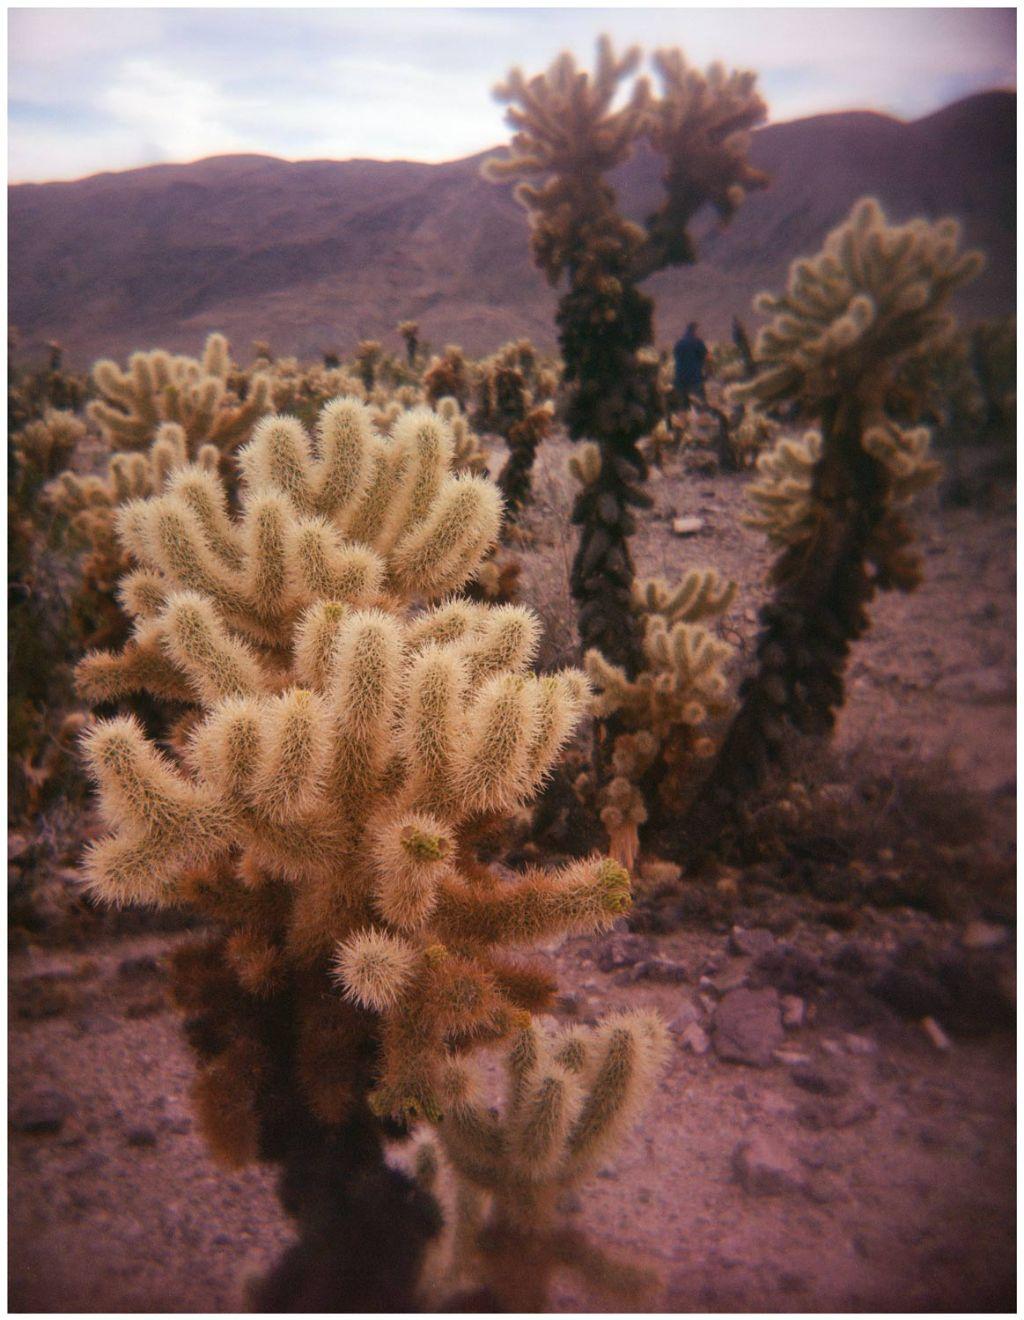 Cholla 1 by Kristine Mendoza, Former First Exposures...